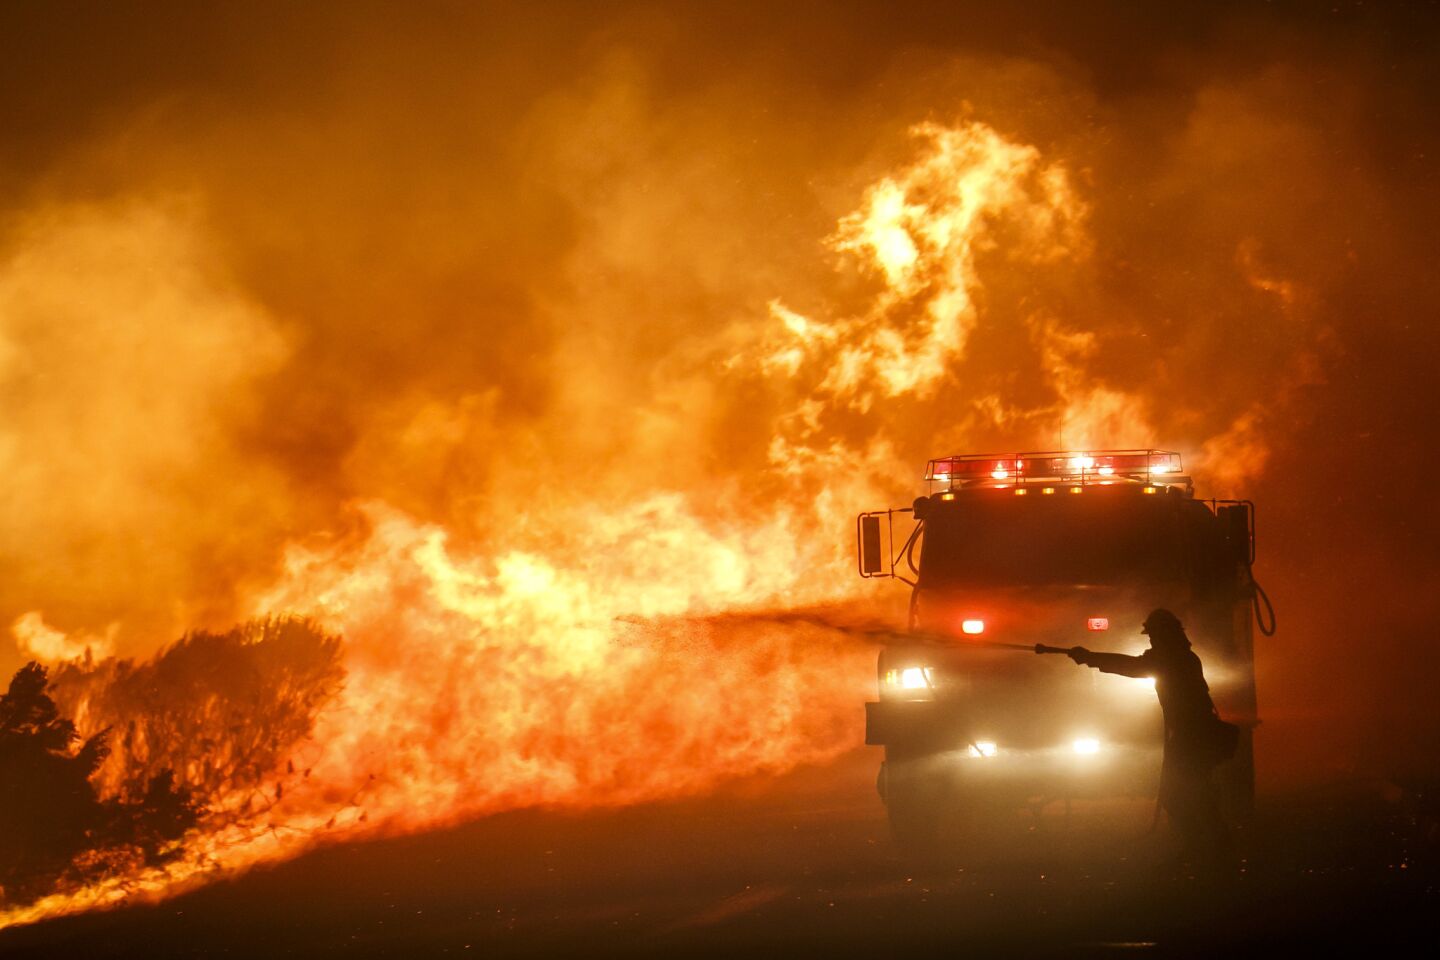 GOLETA, CALIF. -- THURSDAY, JUNE 16, 2016: Firefighters combat the front lines of the Sherpa Fire to avoid it from moving onto Highway 101, along Calle Real road, in Goleta, Calif., on June 16, 2016. (Marcus Yam / Los Angeles Times)